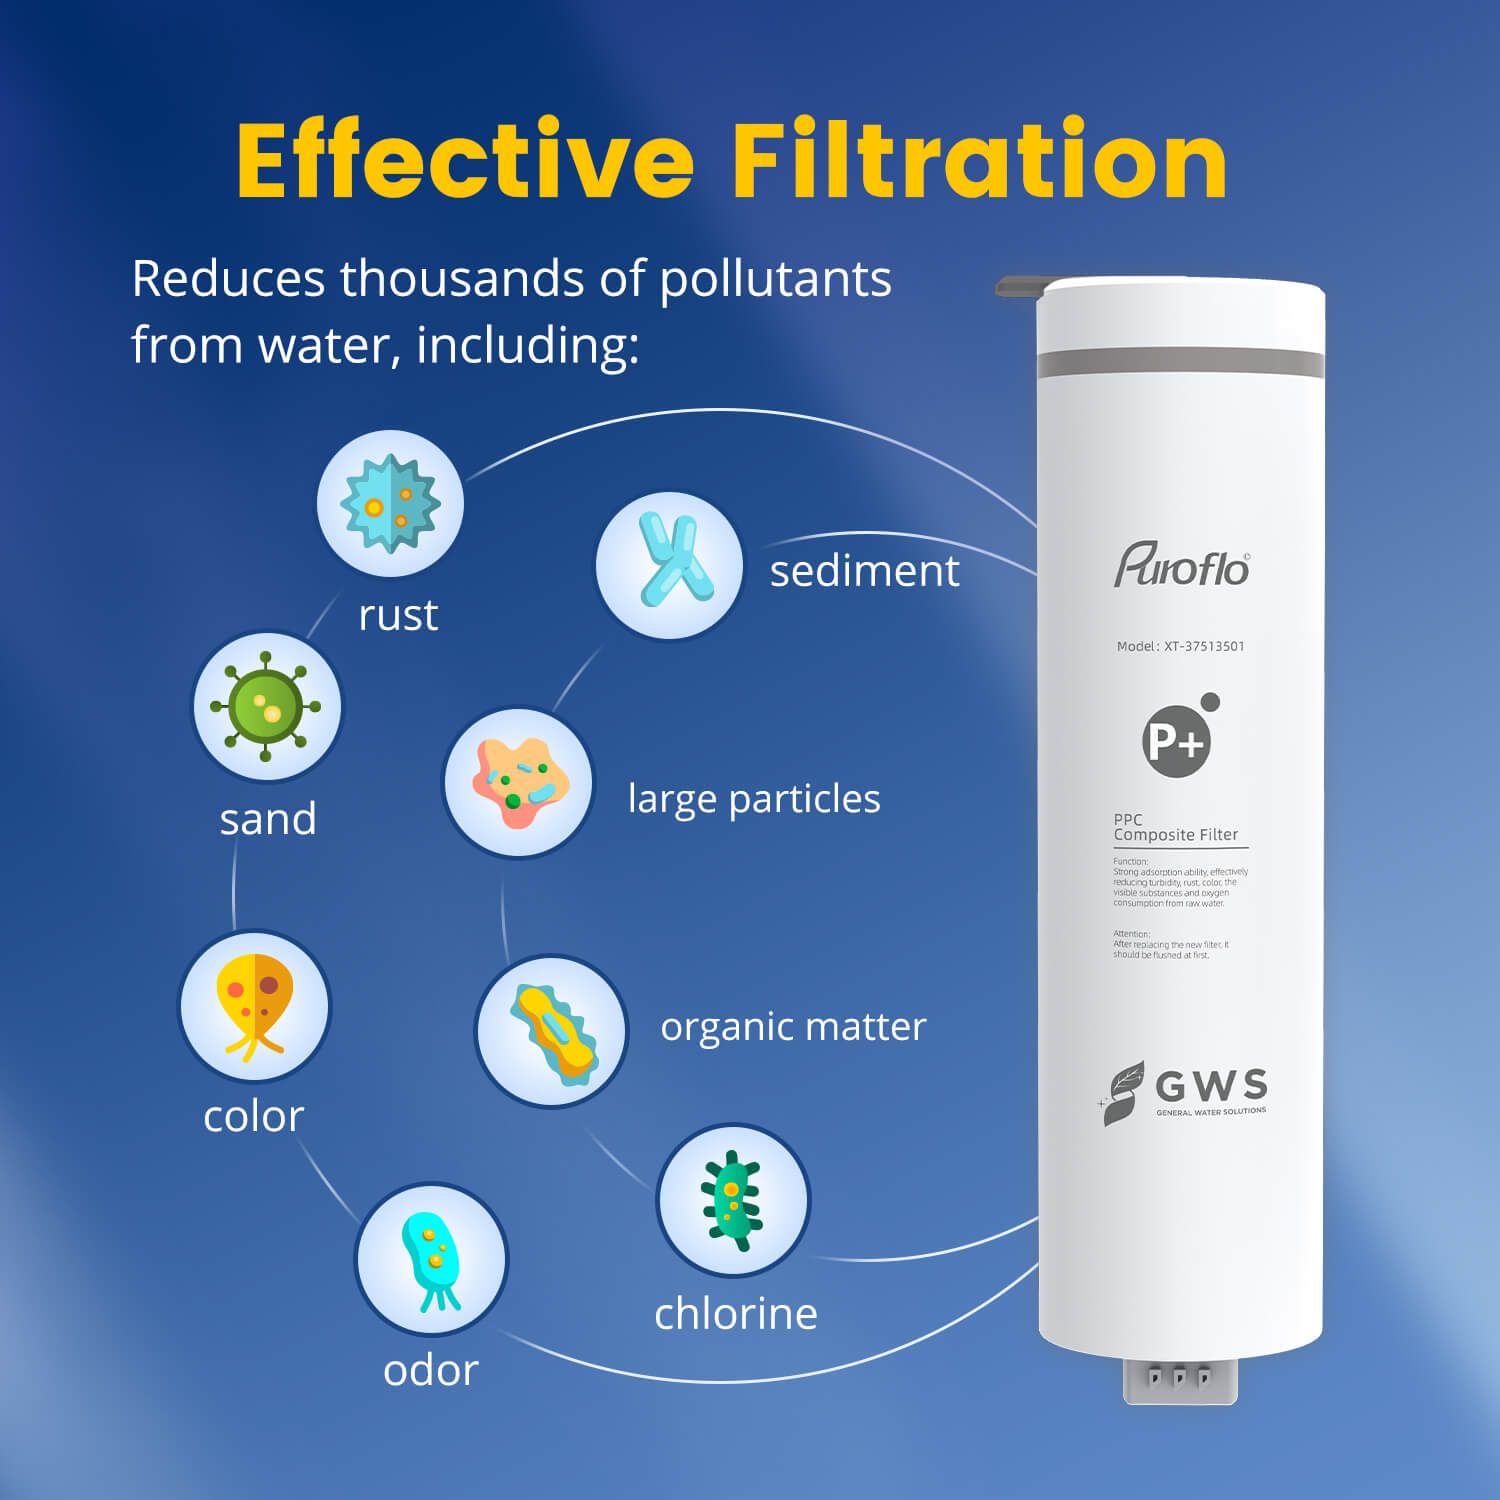 Puroflo PPC Replacement Filter, 1 Year Lifespan, Replacement for XT-600 Tankless Reverse Osmosis System, Reduces Large Particles of Impurities, Chlorine, Colors, and Odors XT-37513501 (1PACK)